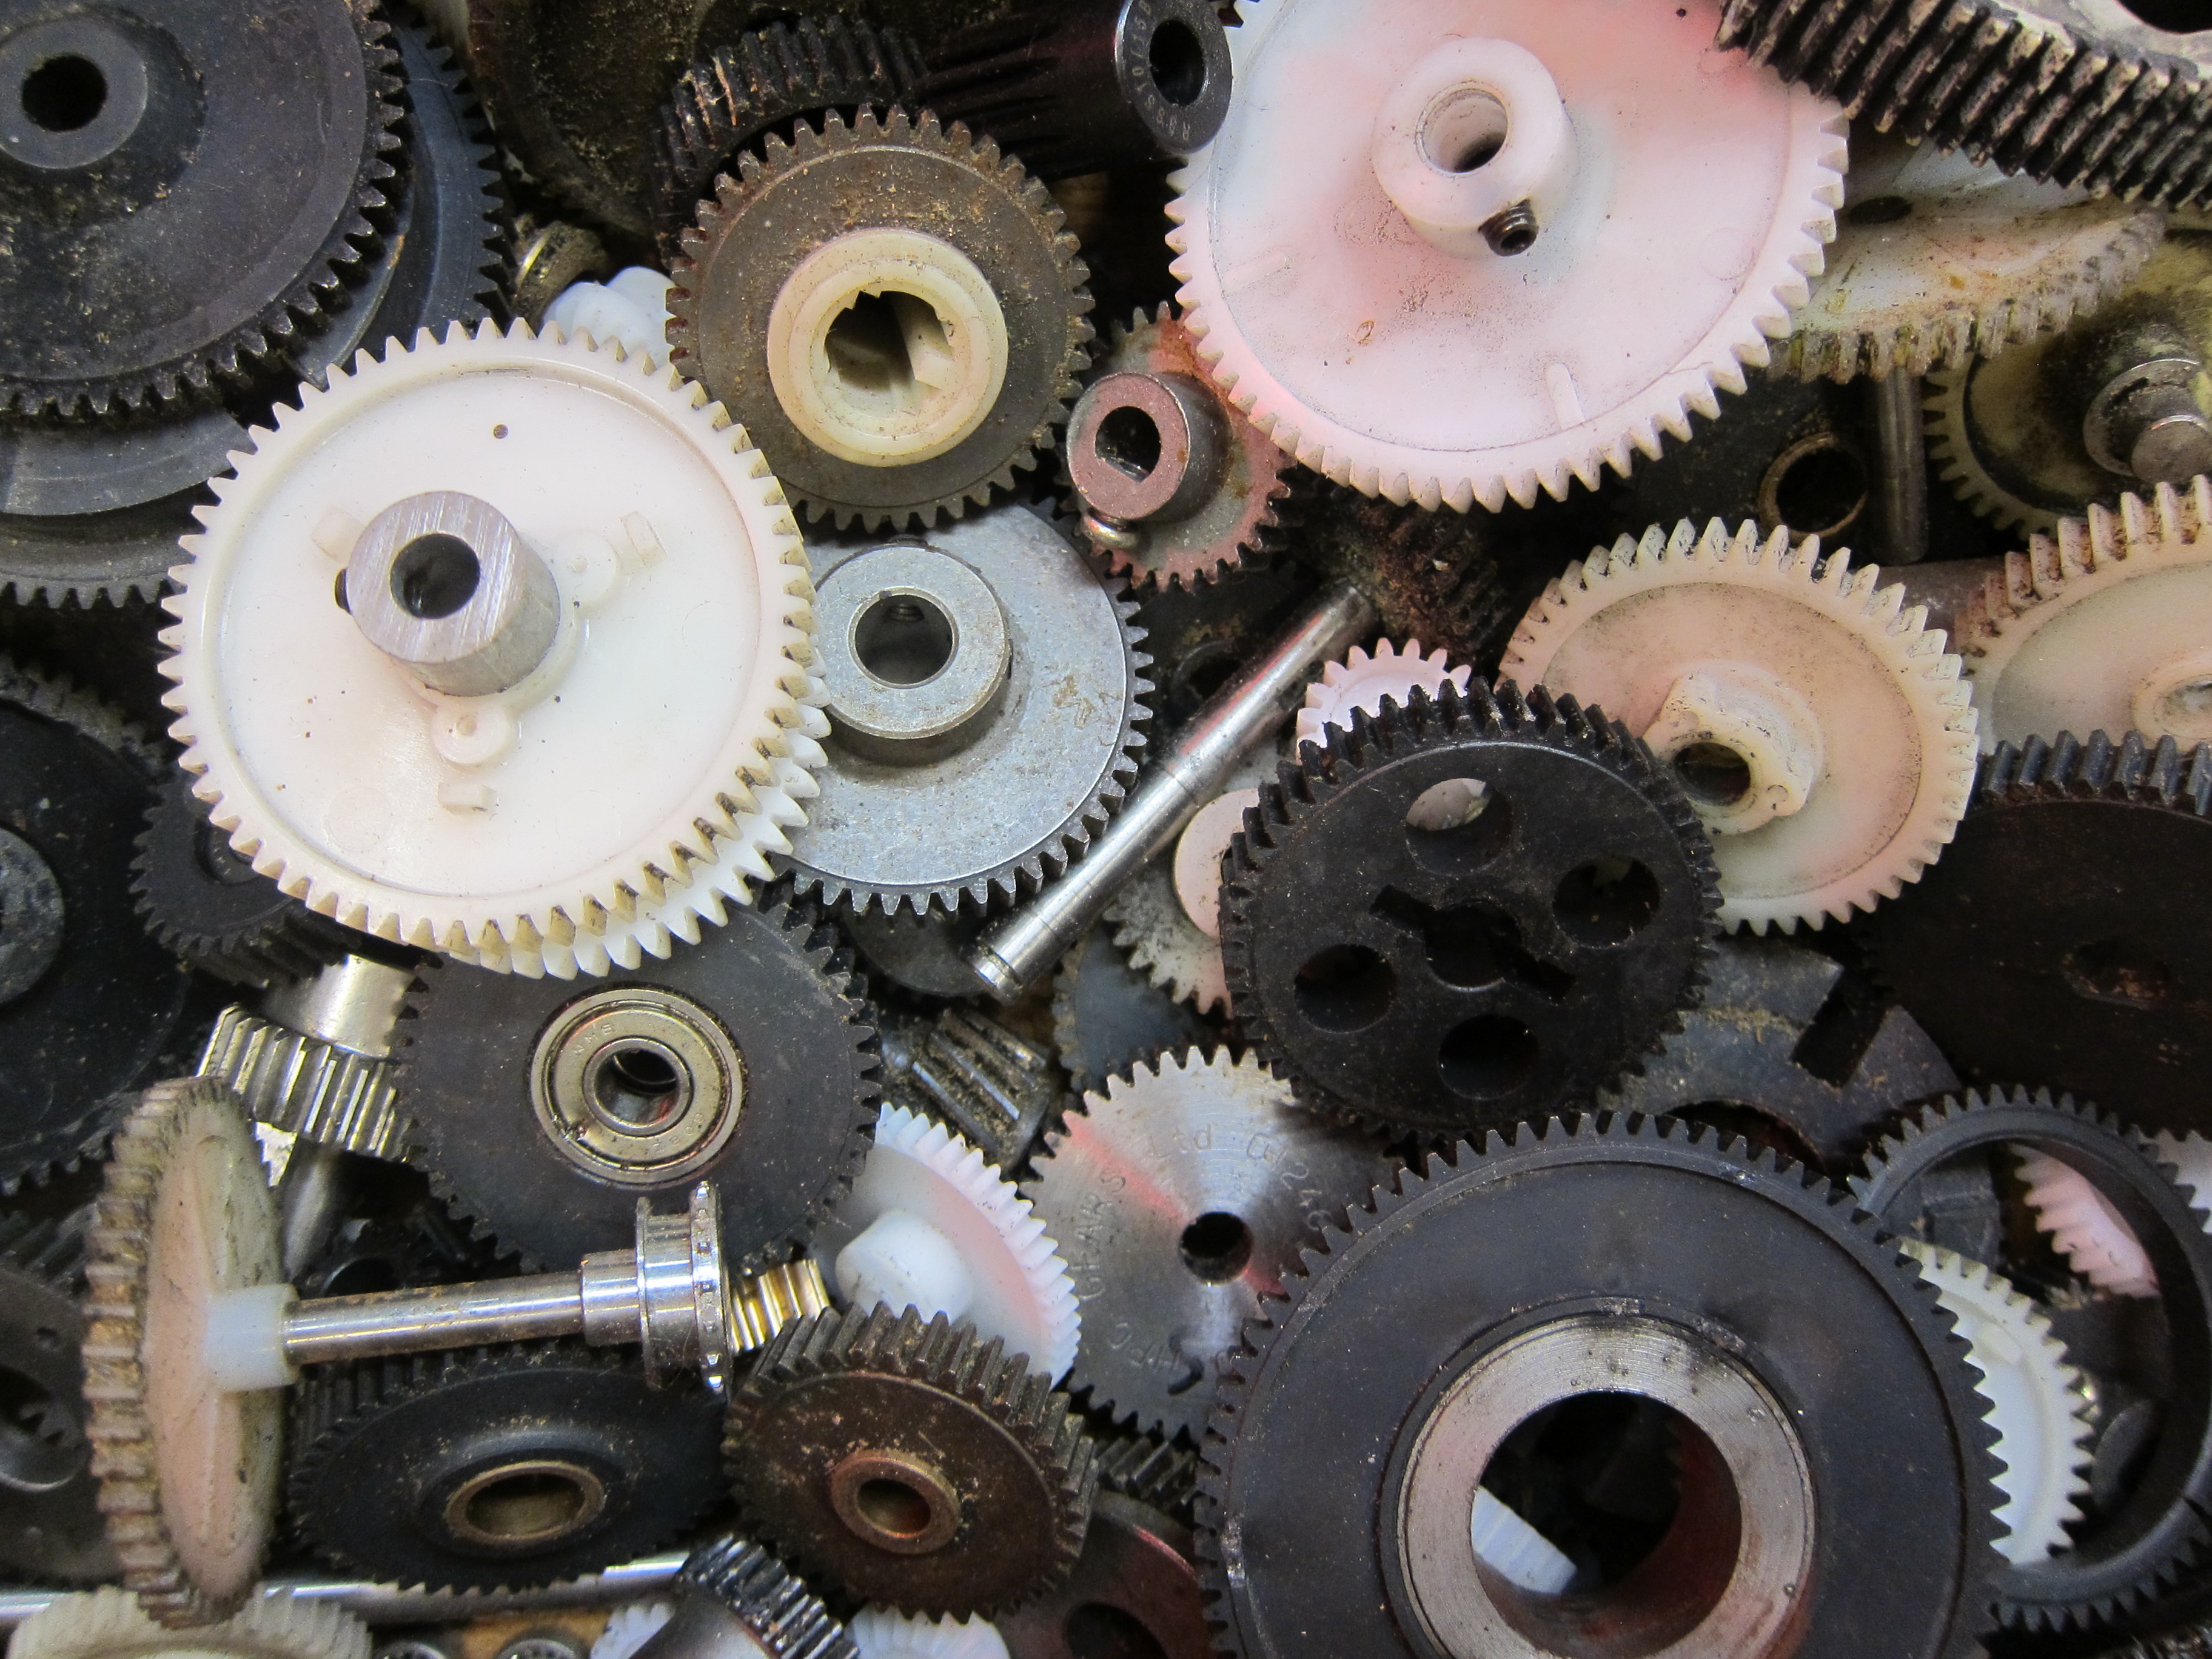 A Mechanical Engineer’s Quick Tips for Using Gears